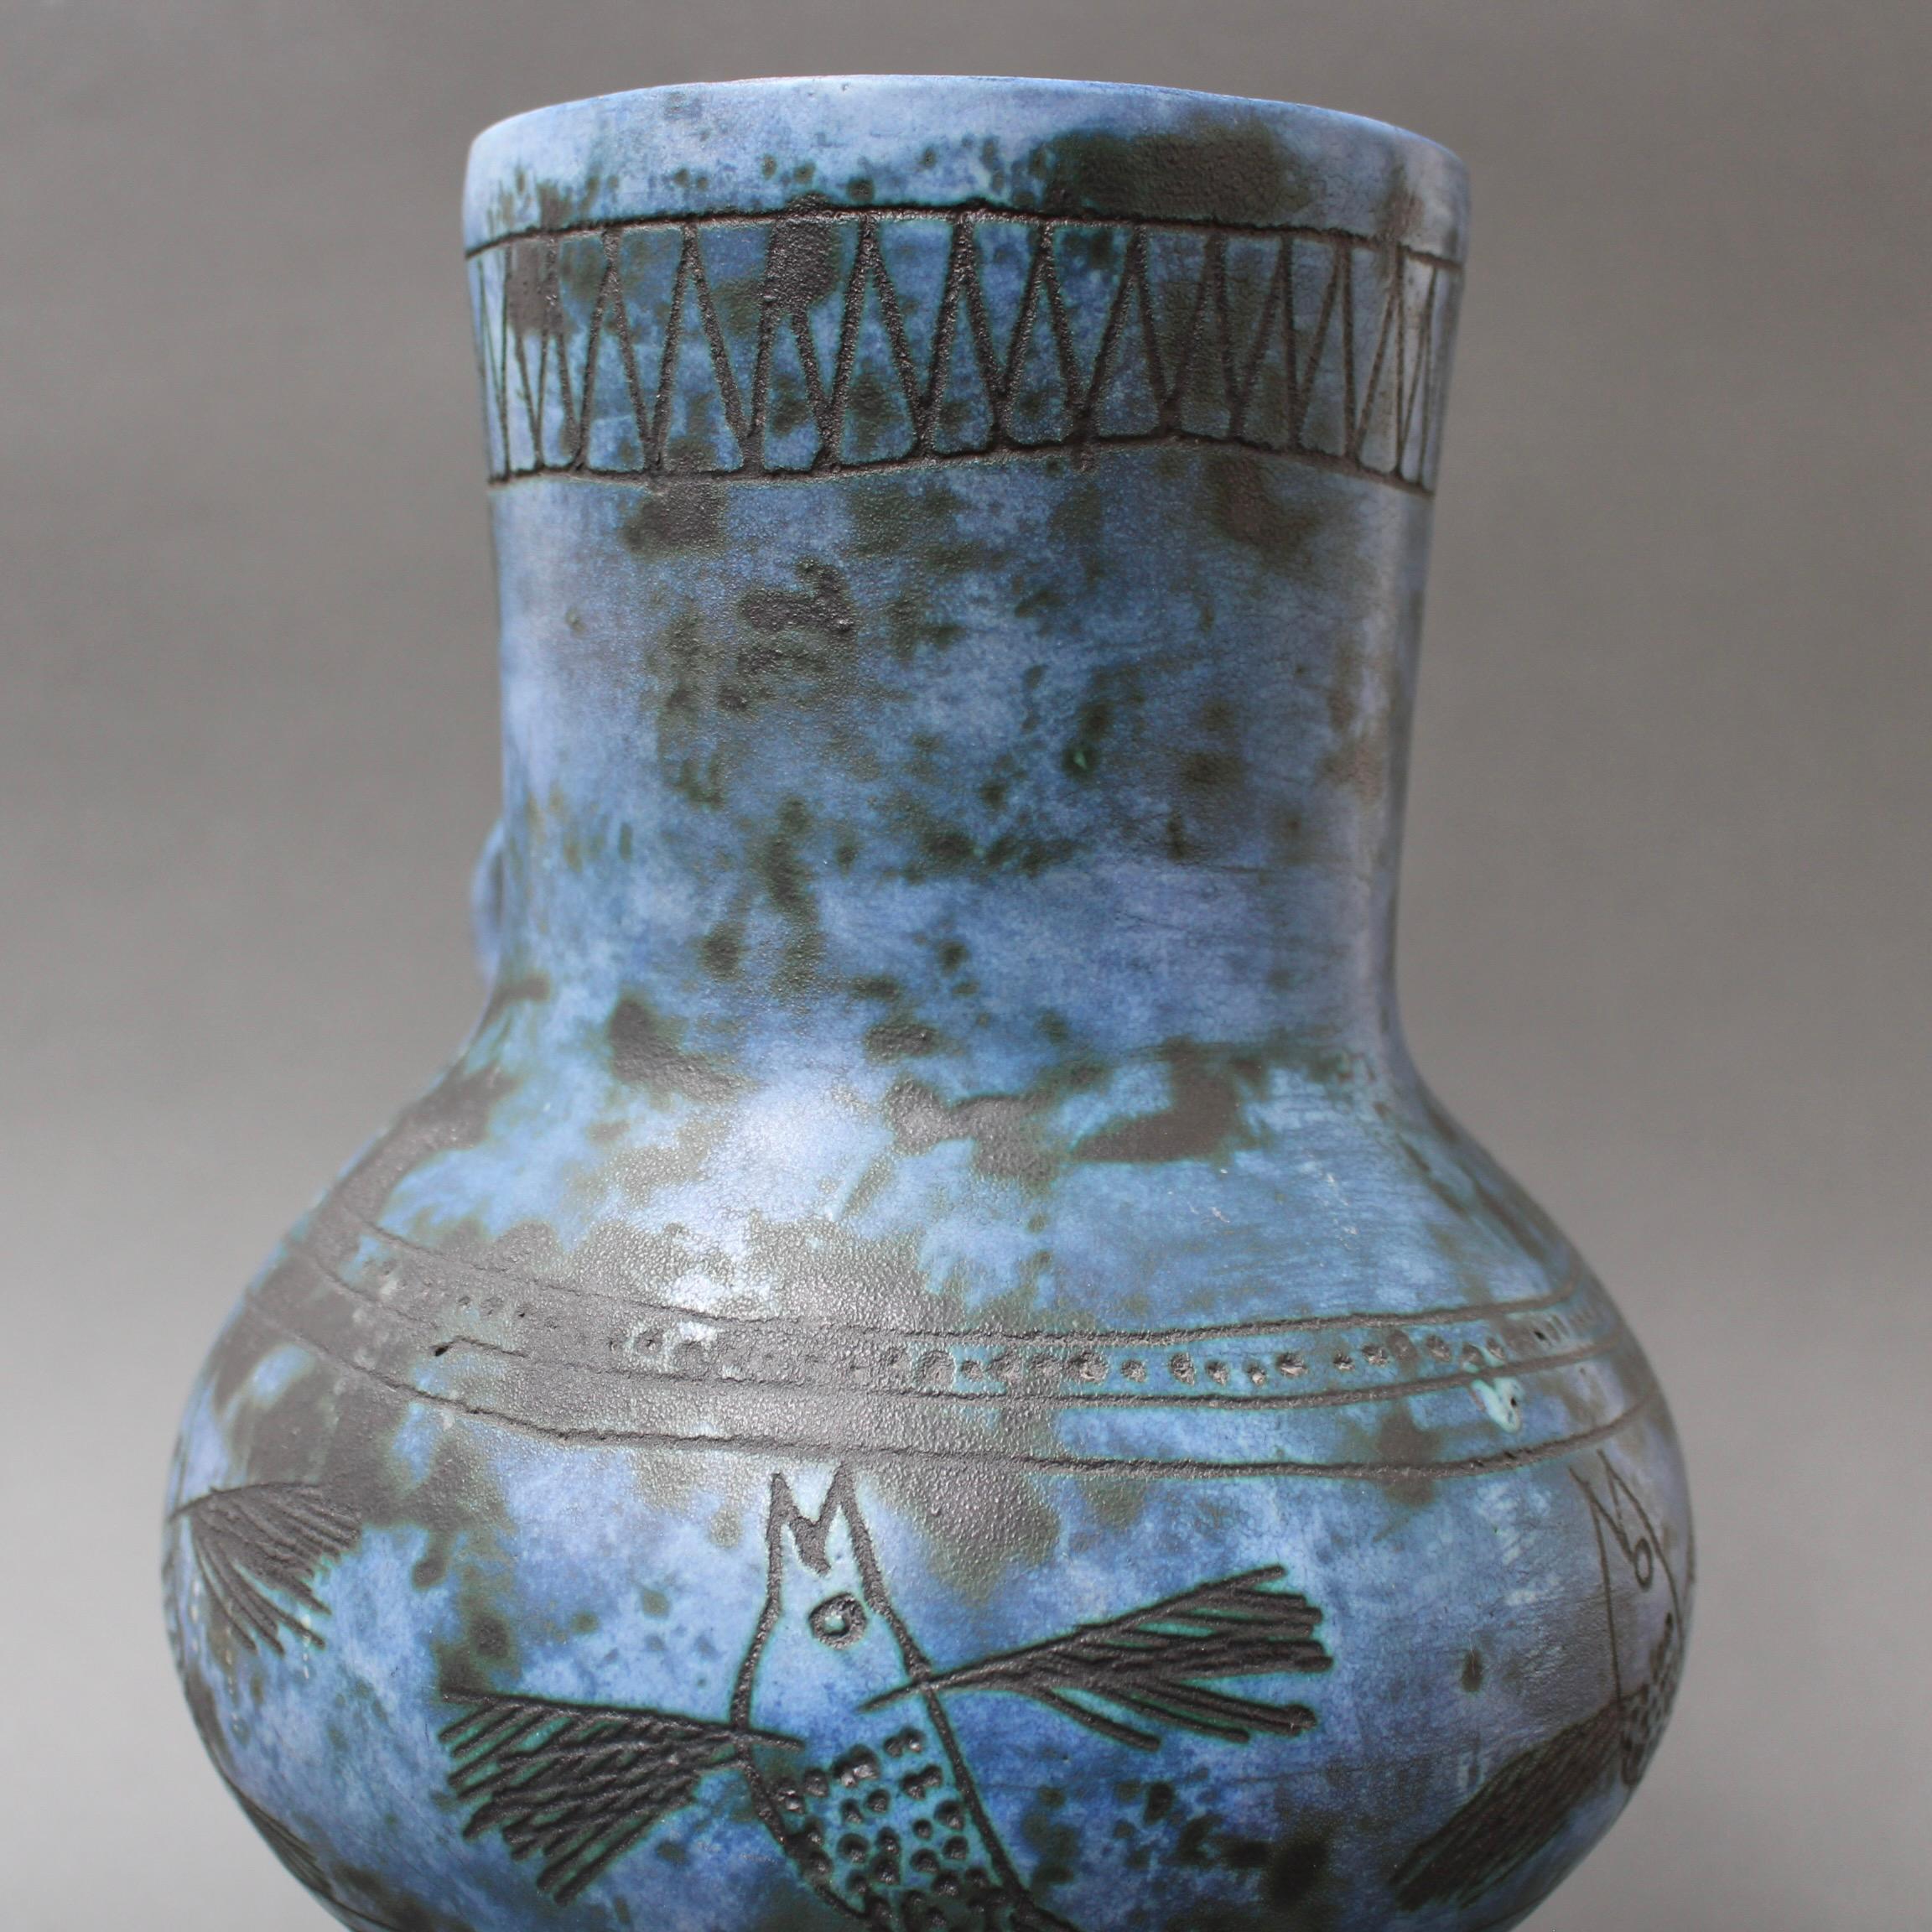 Vintage French Ceramic Vase by Jacques Blin, 'circa 1950s' For Sale 11